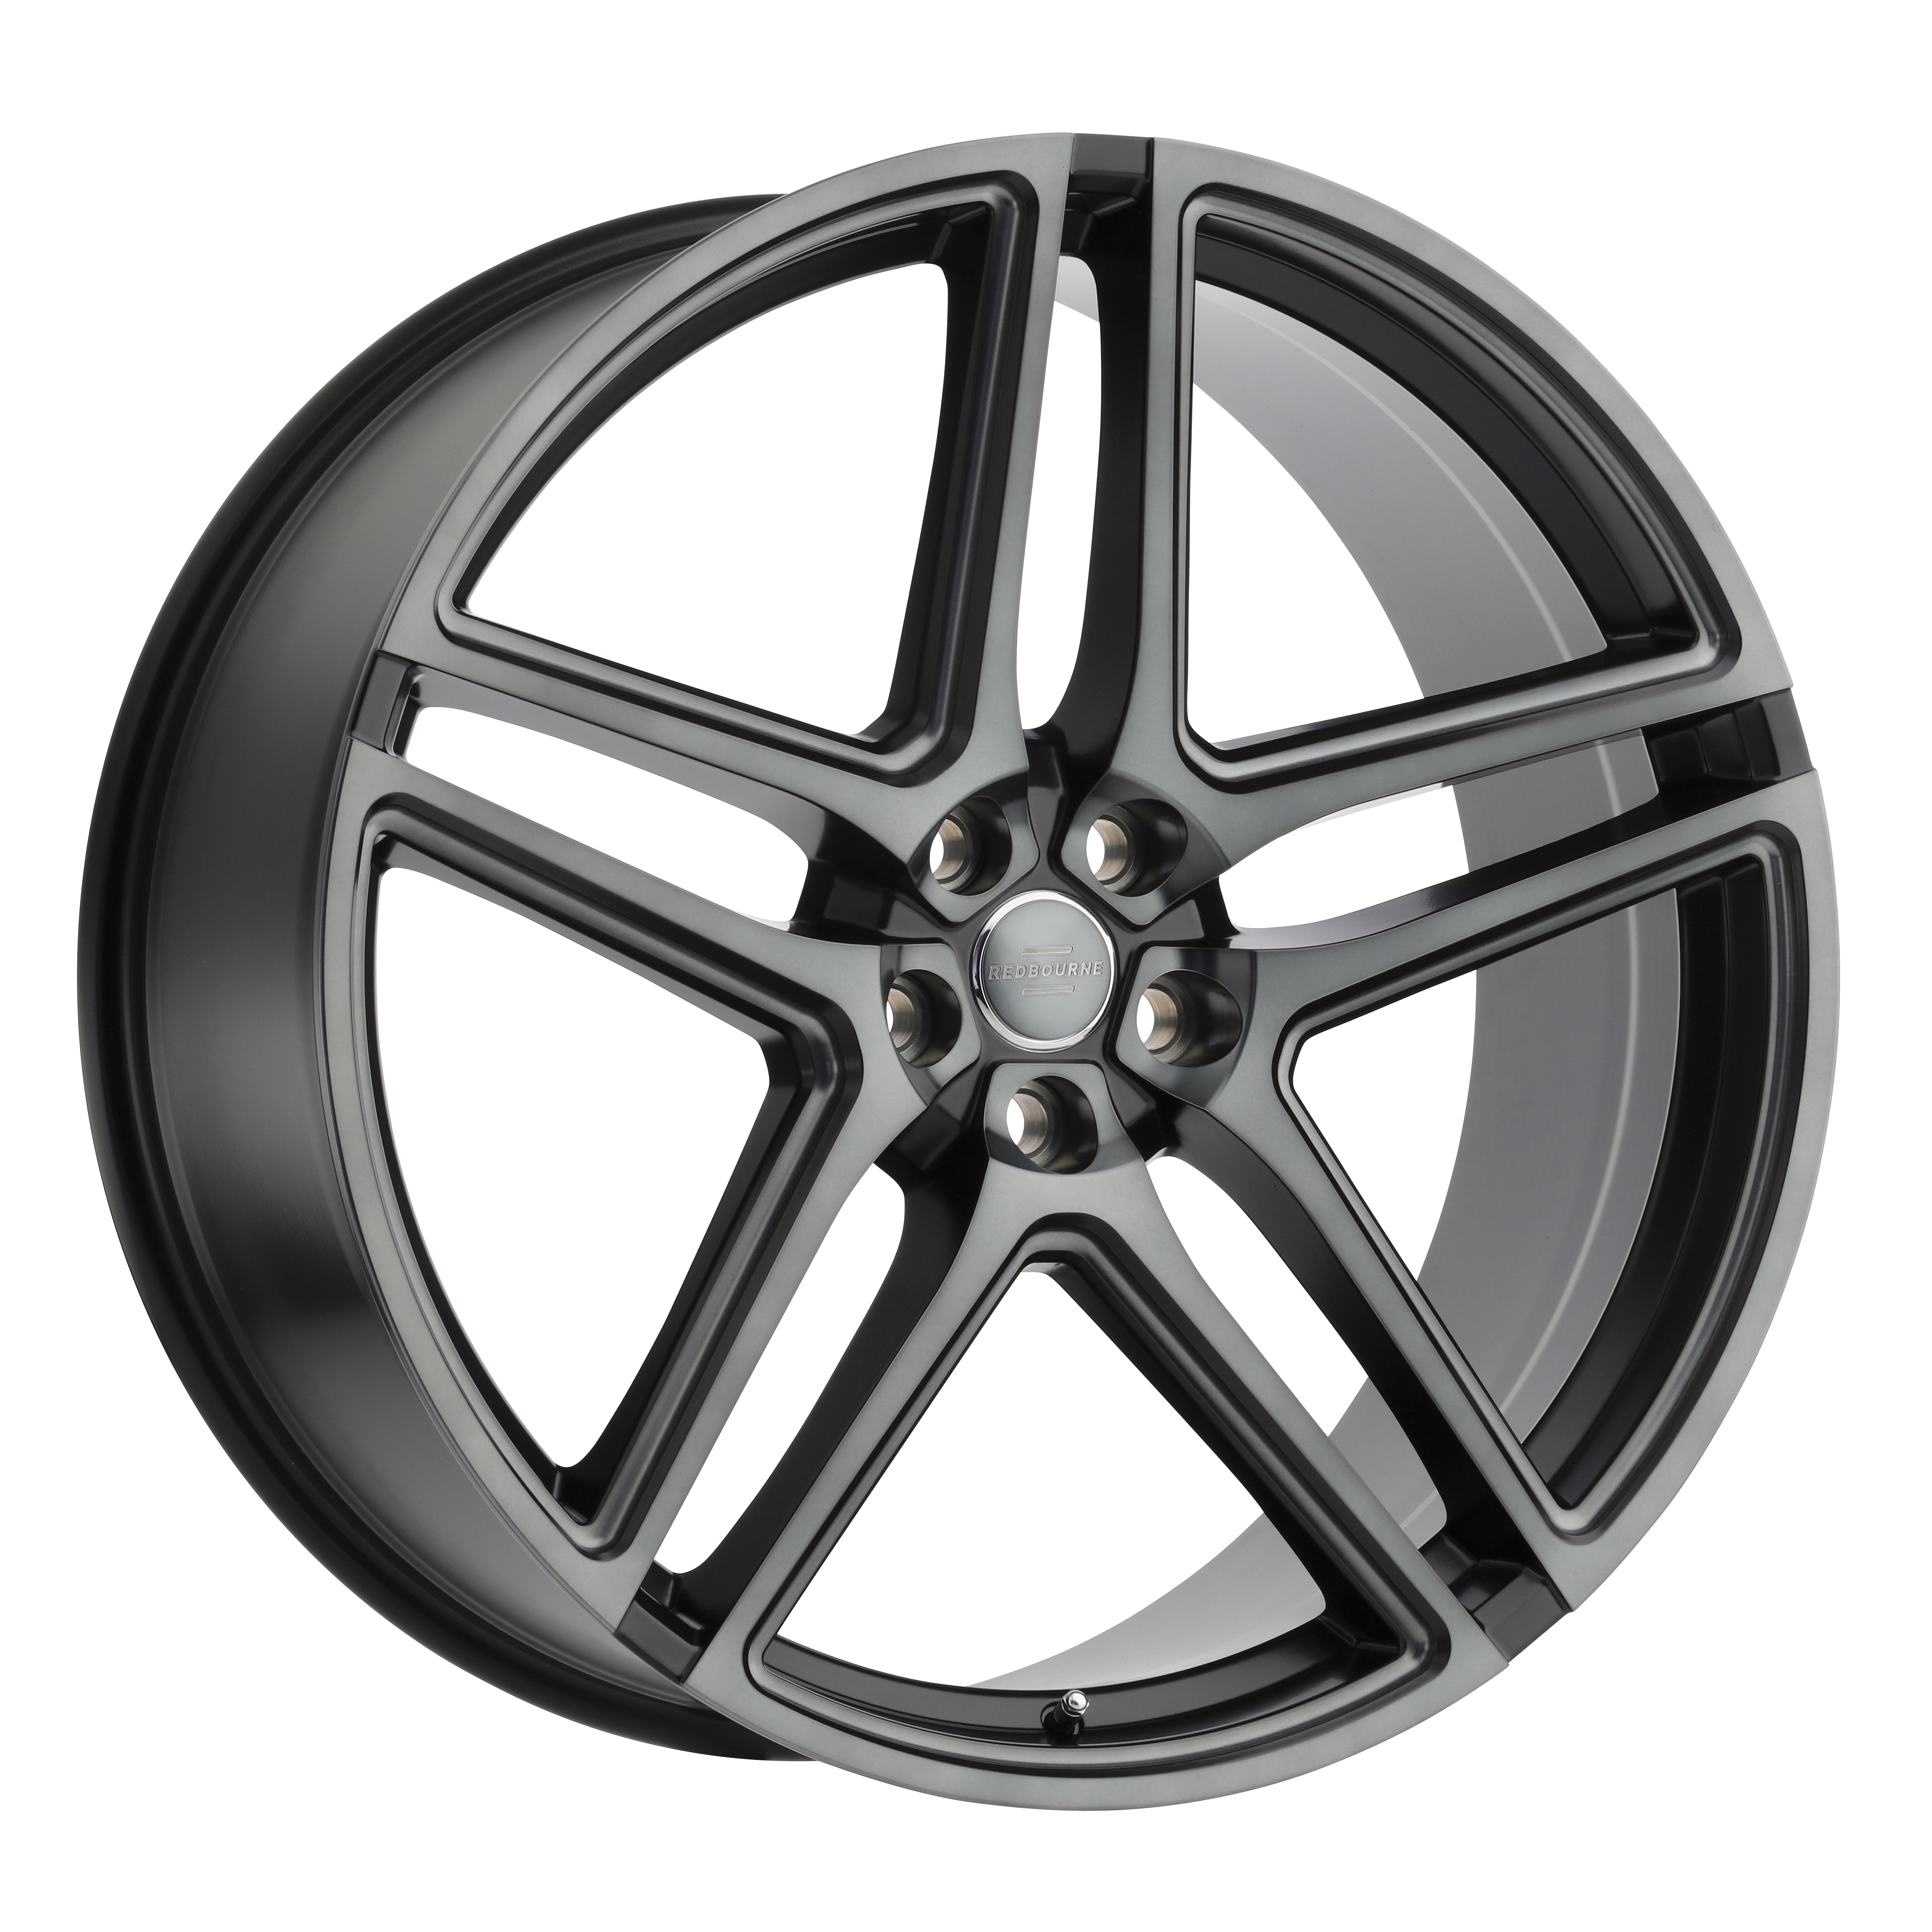 Crown Matte Black W- Machine Face- Ball Milled Spoke- And Translucent Clear Tint